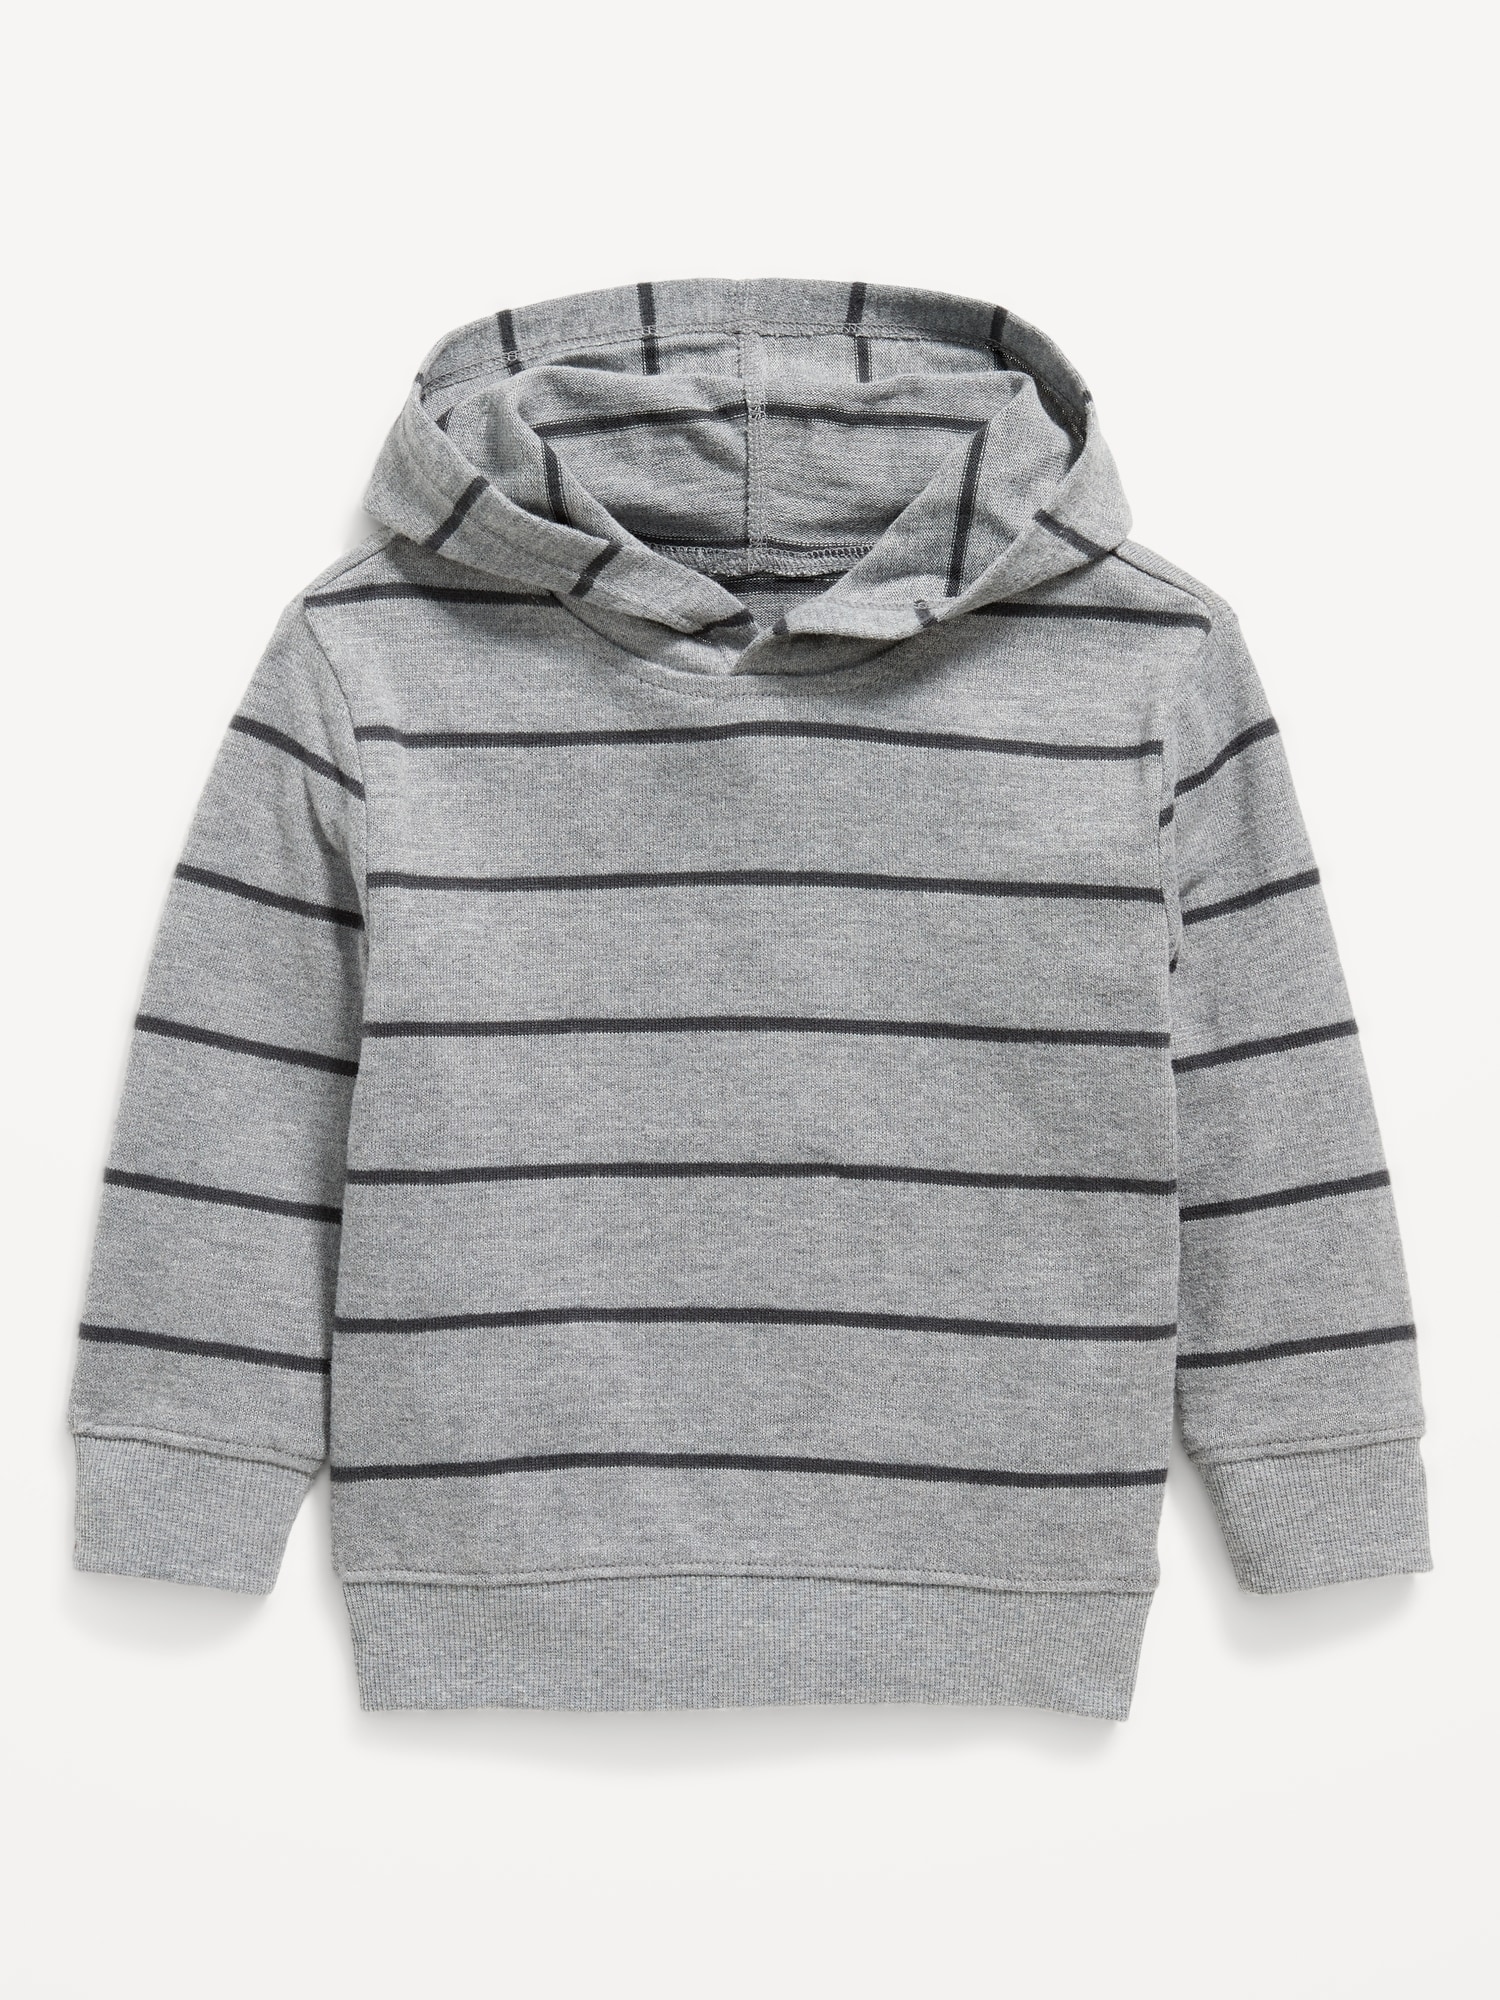 Cozy-Knit Striped Pullover Hoodie Old Navy Toddler Boys | for